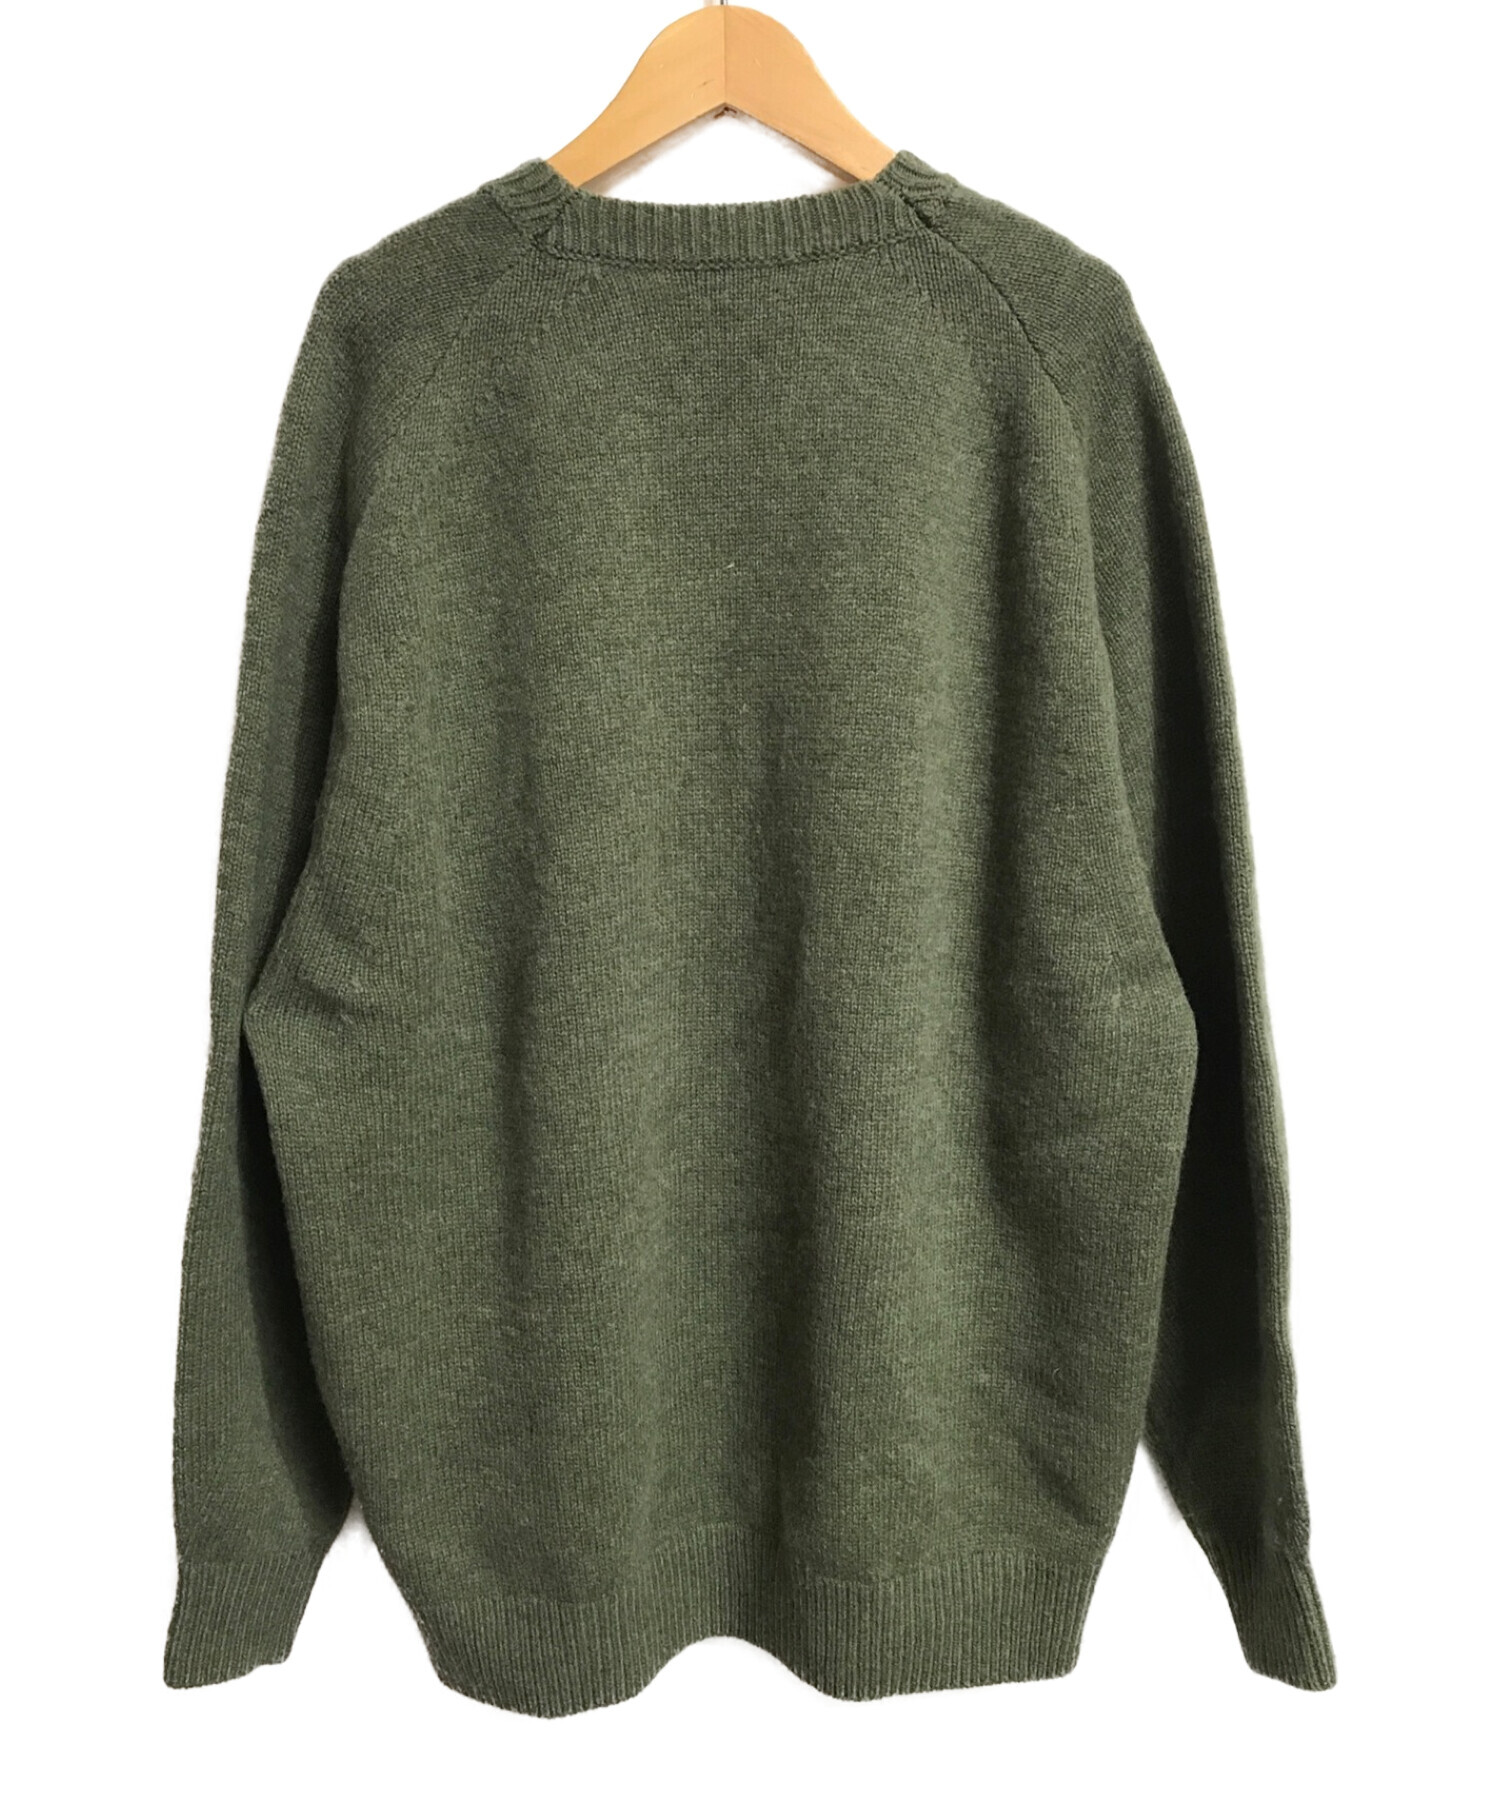 H BEAUTY&YOUTH BALLOON CREW NECK KNIT-